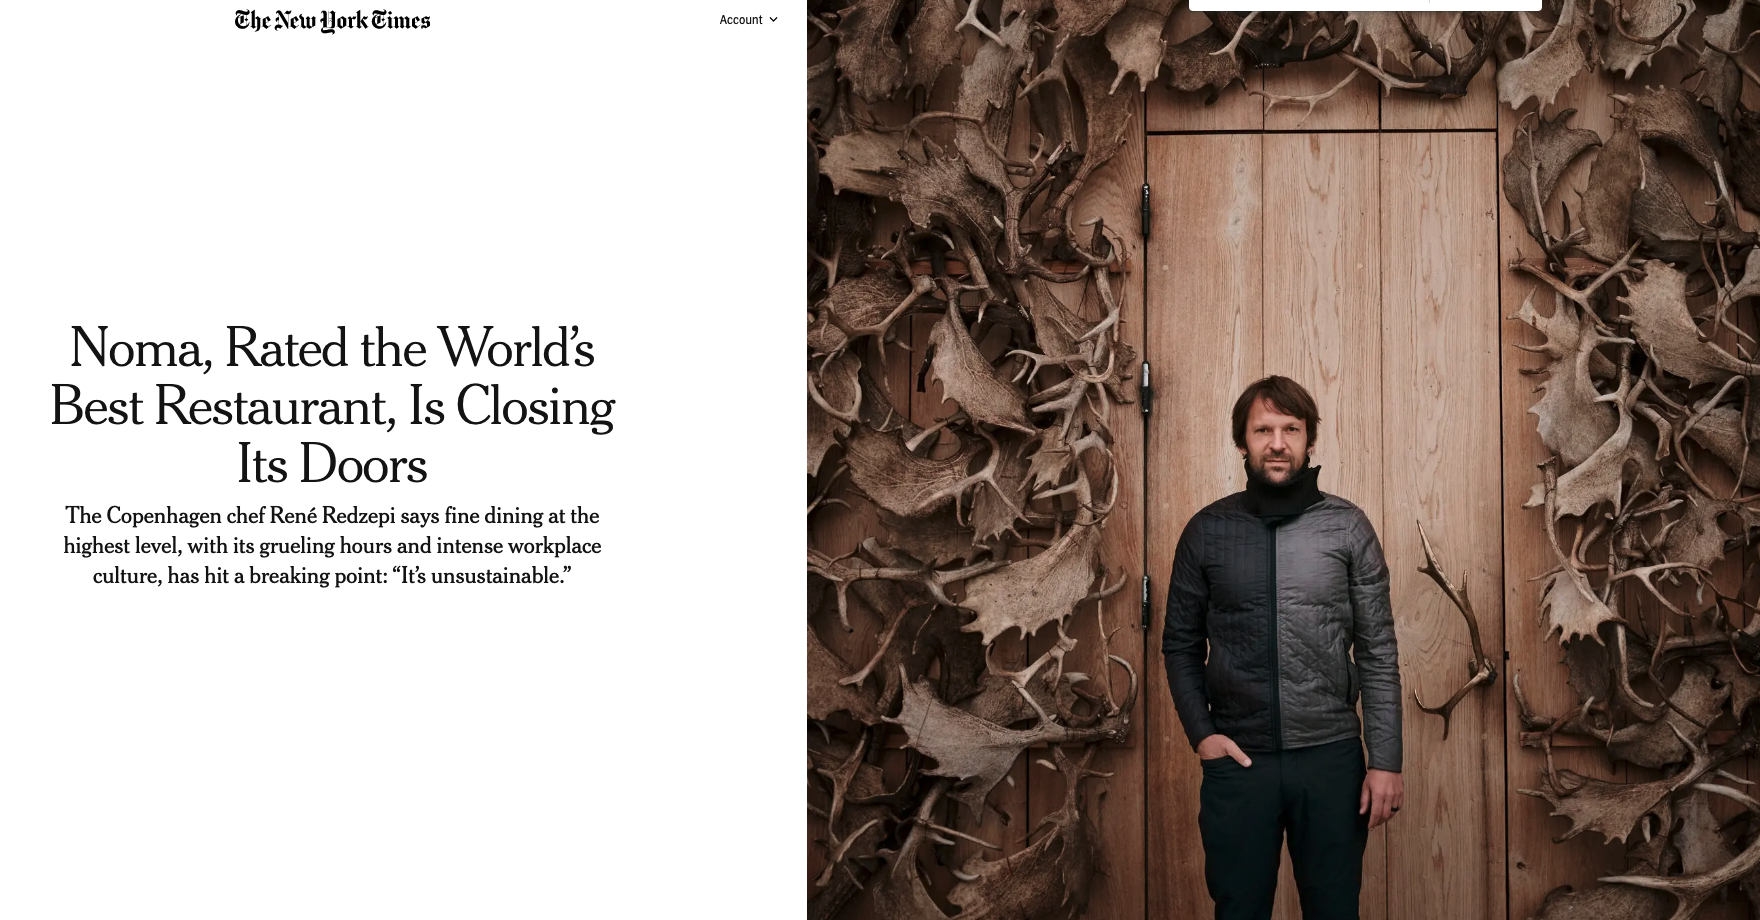 A screenshot of a New York Times story online. On the left, in black lettering on a white background, is the headline and subheadline:  "Noma, Rated the World’s Best Restaurant, Is Closing Its Doors The Copenhagen chef René Redzepi says fine dining at the highest level, with its grueling hours and intense workplace culture, has hit a breaking point: “It’s unsustainable.” On the right of the headline is a photo of Rene Redzepi standing in front of a wooden door with antlers decorated around the door.